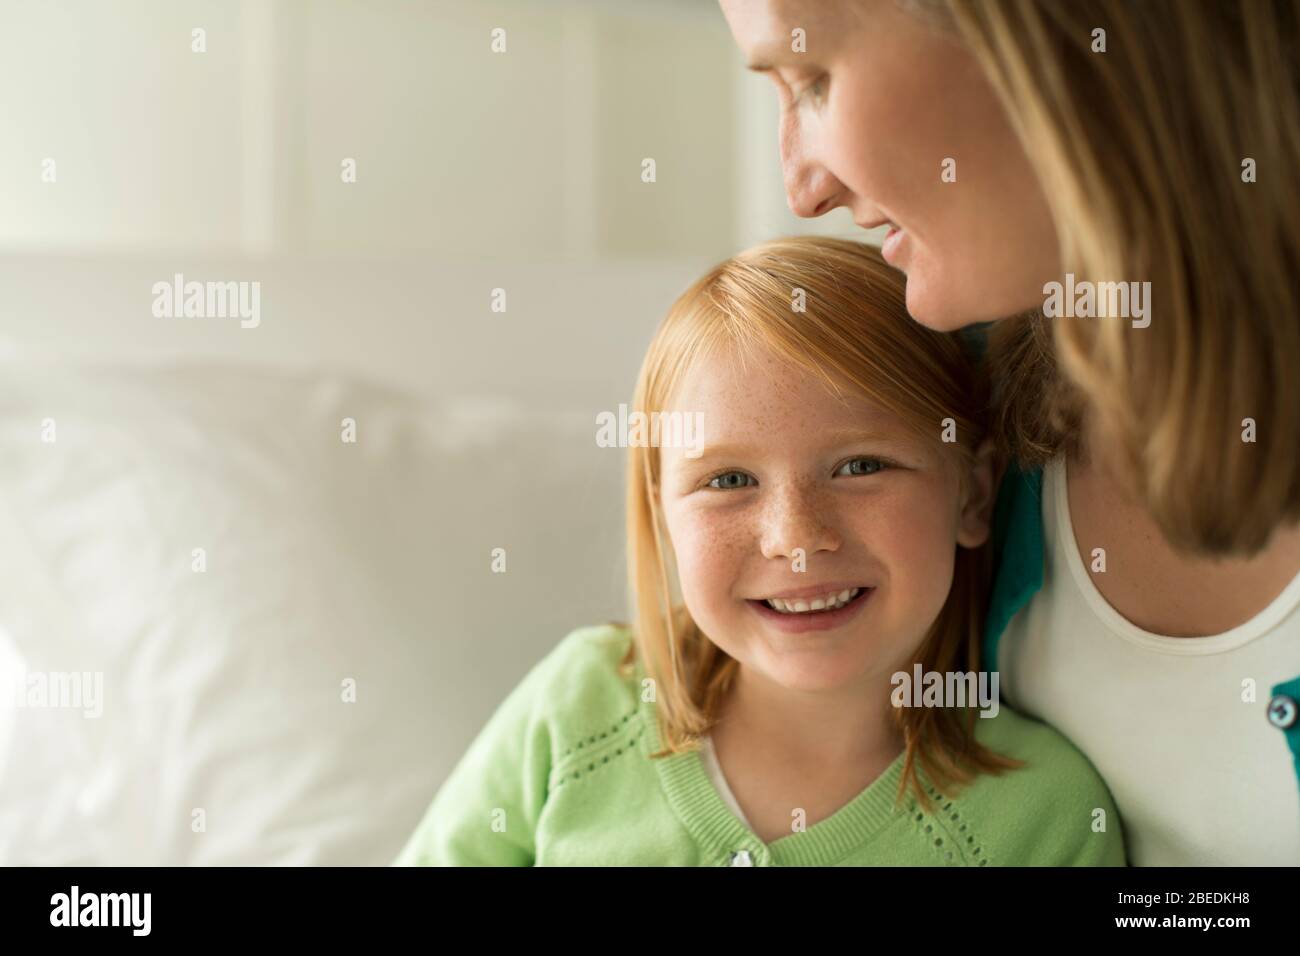 Portrait of a smiling young girl sitting with her mother Stock Photo